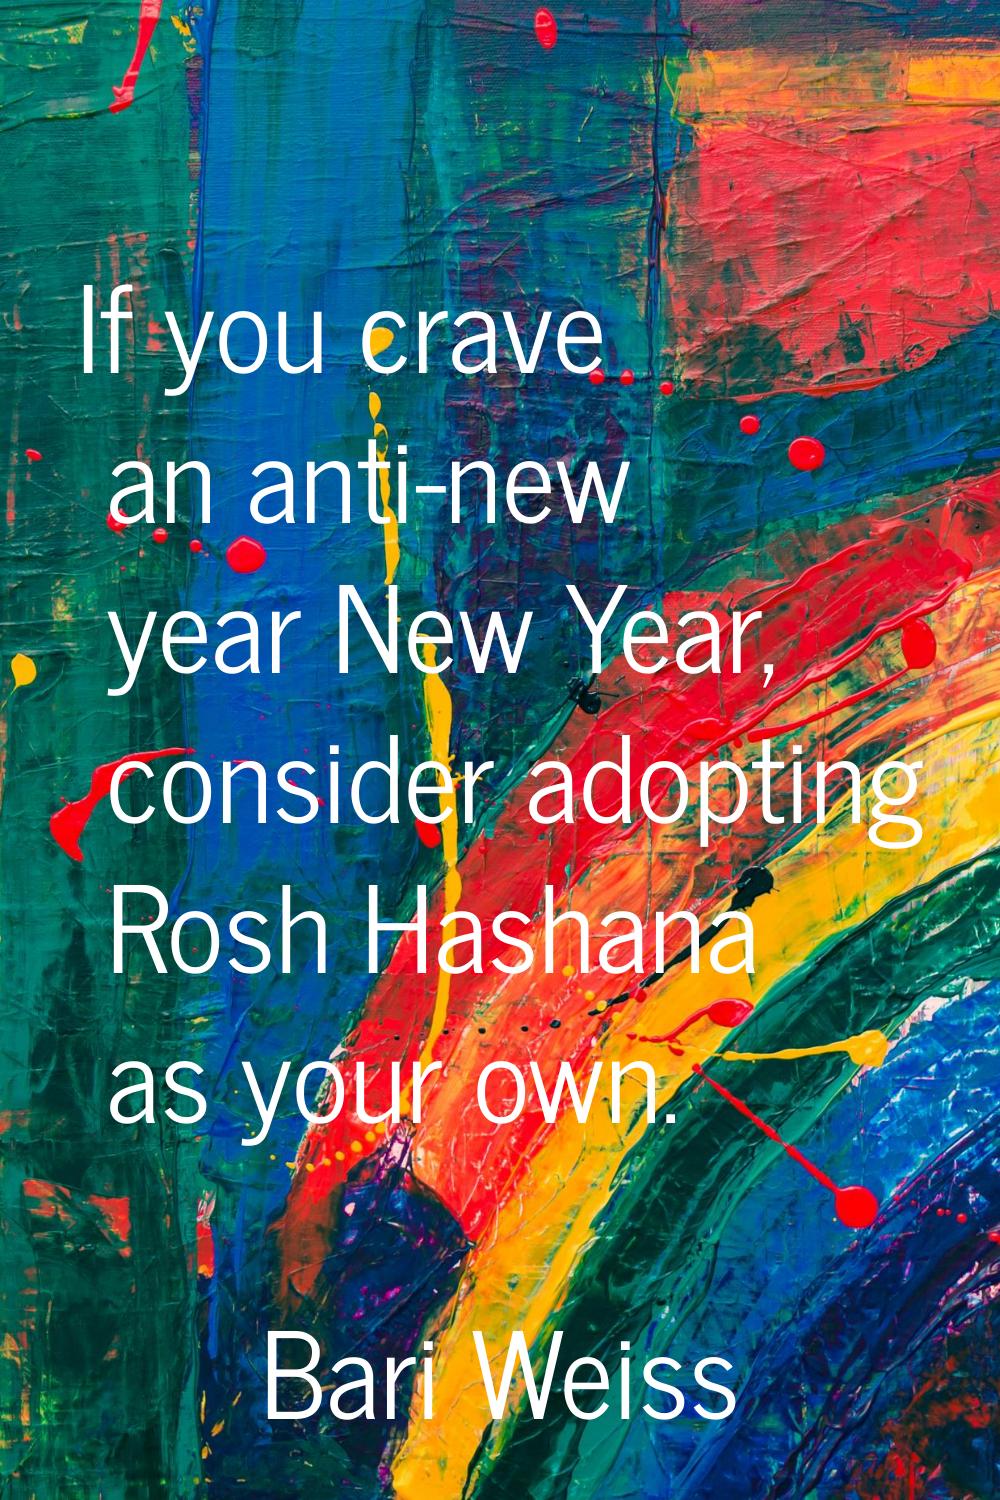 If you crave an anti-new year New Year, consider adopting Rosh Hashana as your own.